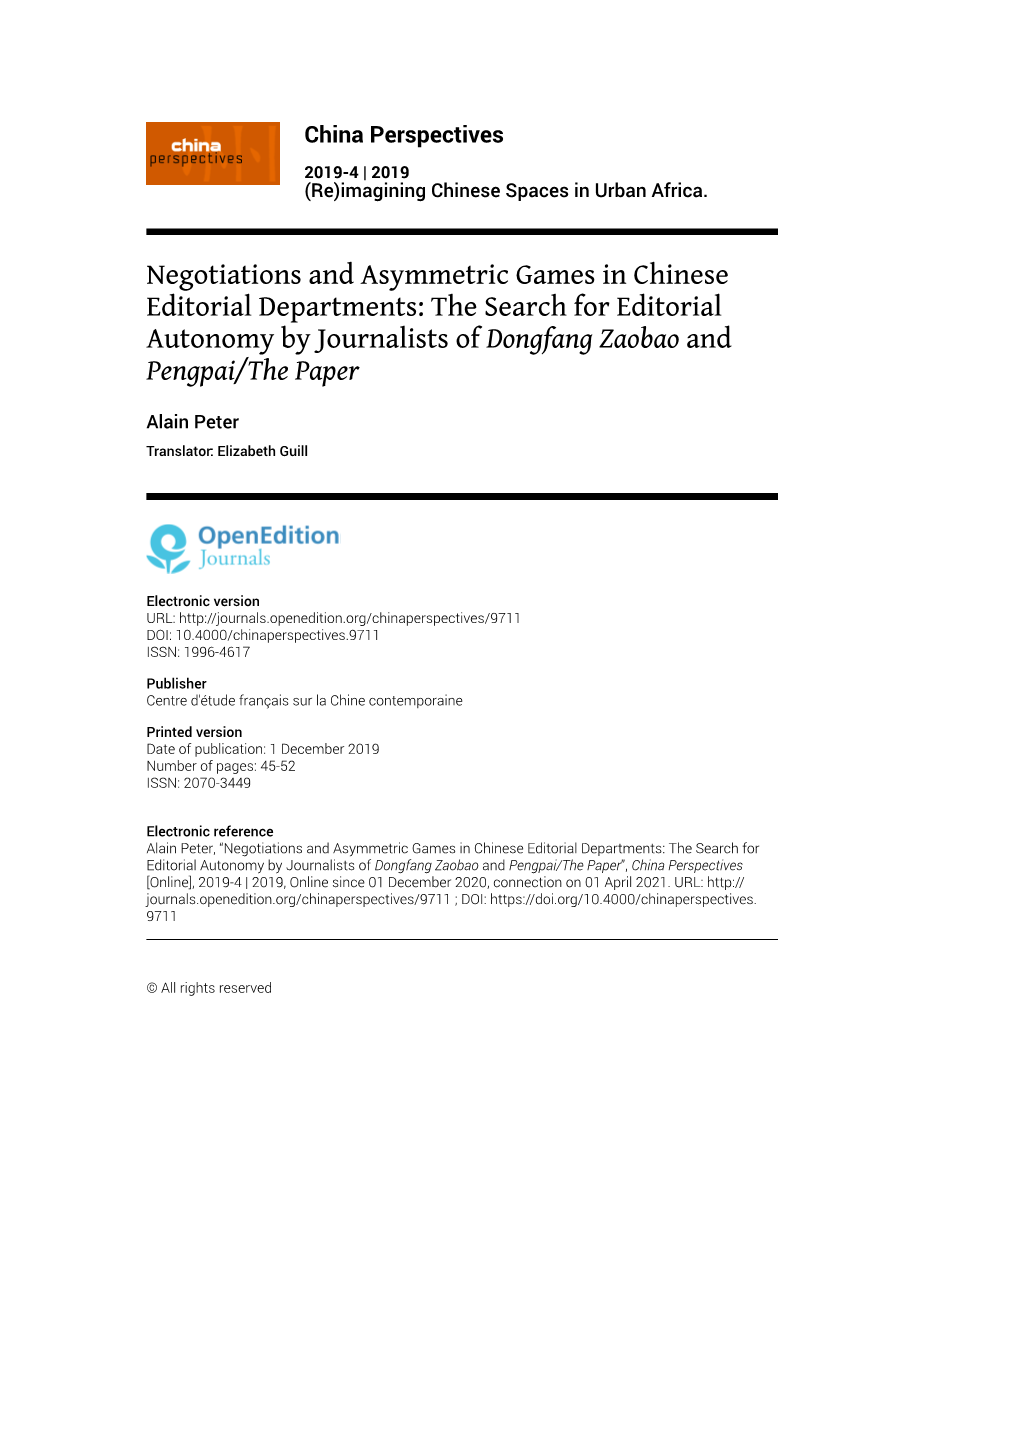 Negotiations and Asymmetric Games in Chinese Editorial Departments: the Search for Editorial Autonomy by Journalists of Dongfang Zaobao and Pengpai/The Paper